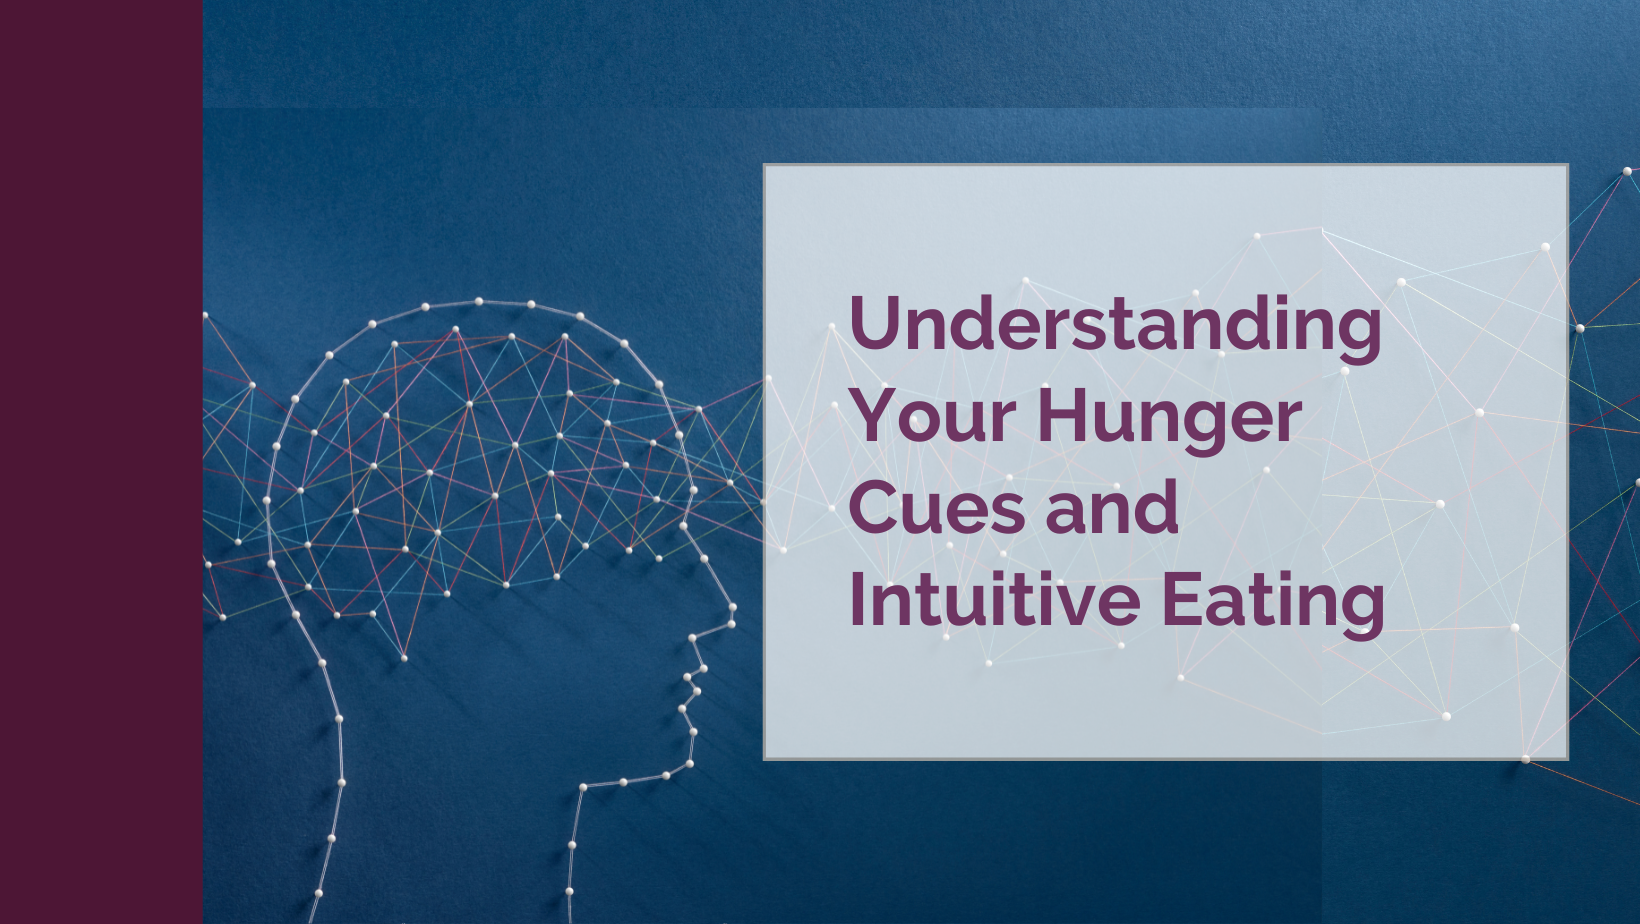 Understanding Your Hunger Cues and Intuitive Eating